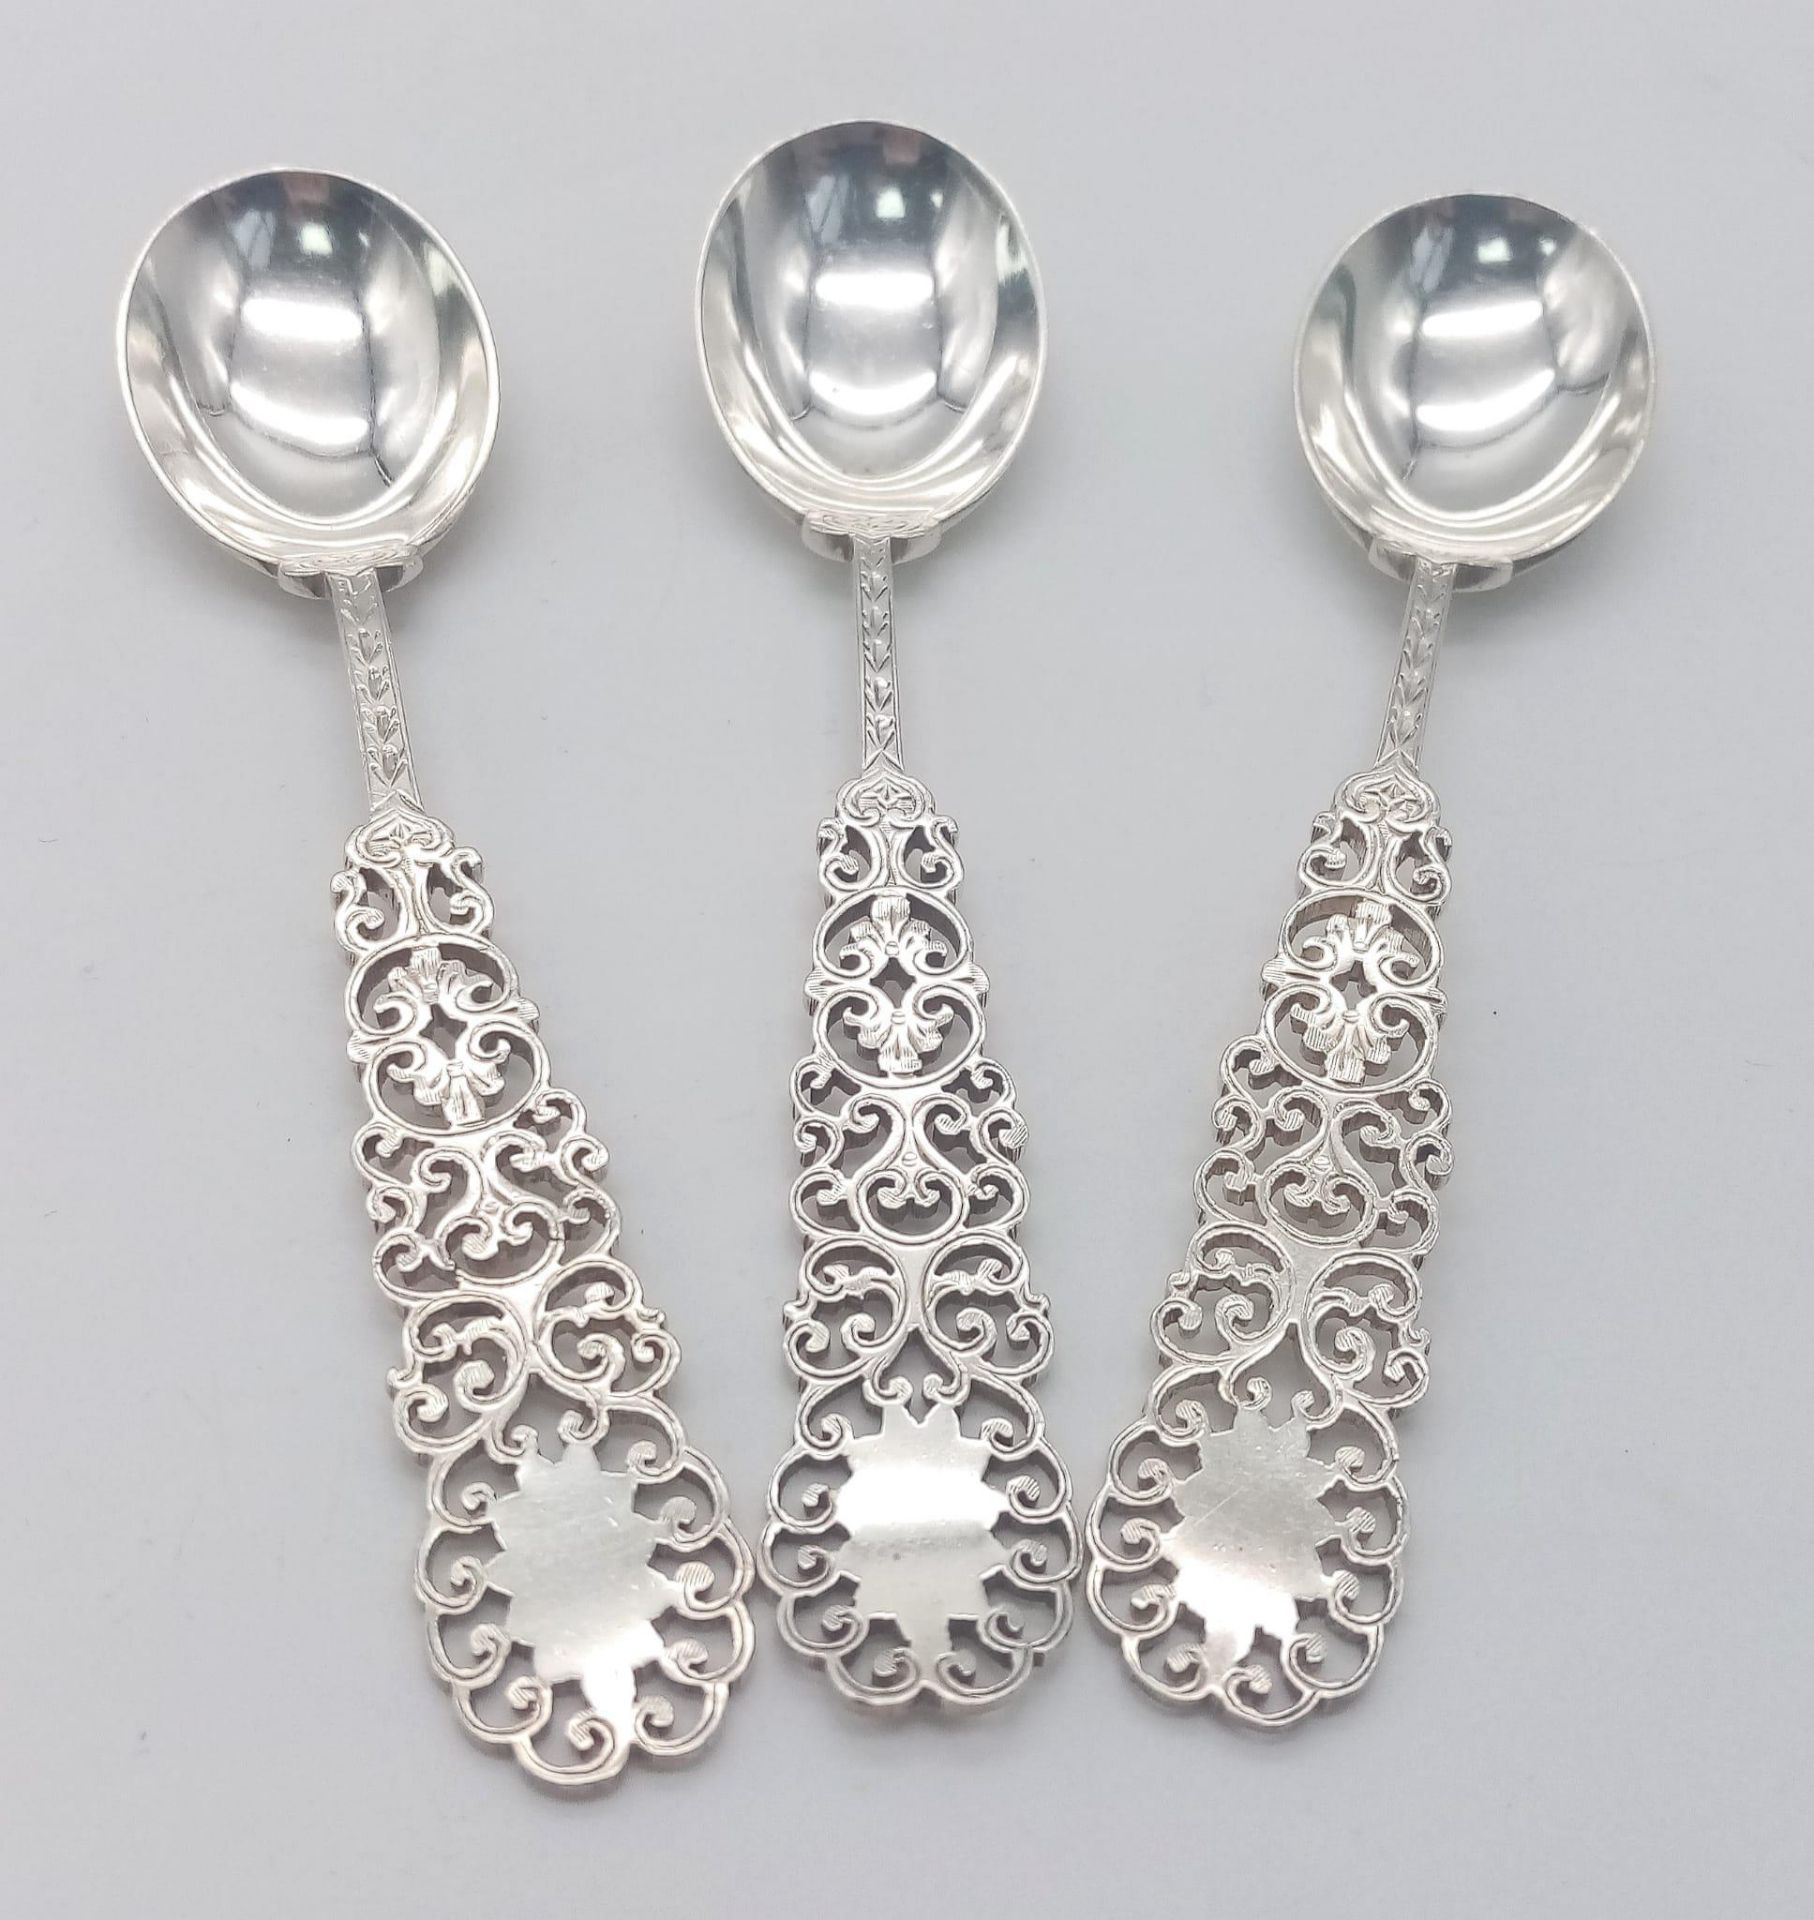 A SET OF 3 ORNATE TEASPOONS MADE IN LONDON IN 1892 WITH FANTASTIC PIERCED WORK HANDLES . 46.9gms